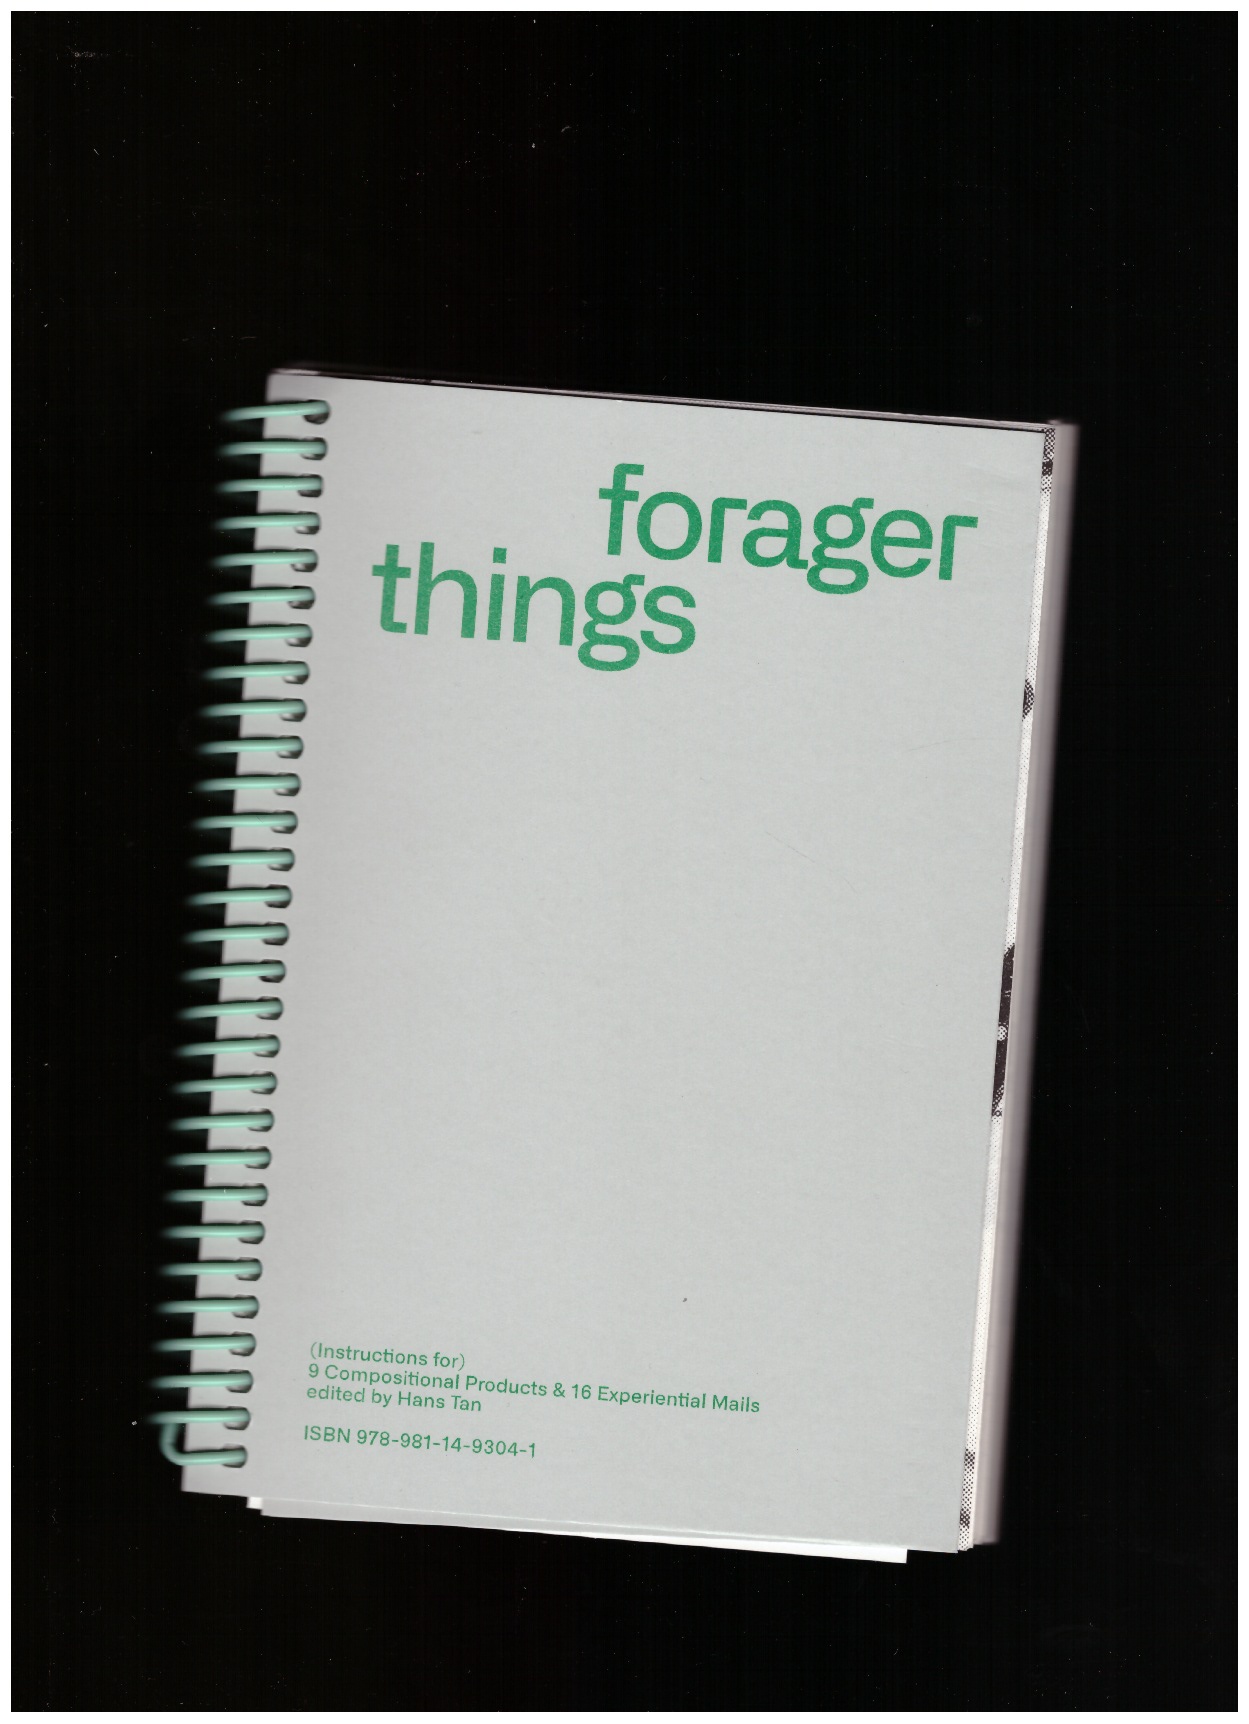 TAN, Hans (ed.) - Forager Things (Instructions For) 9 Compositional Products & 16 Experi Mental Mails